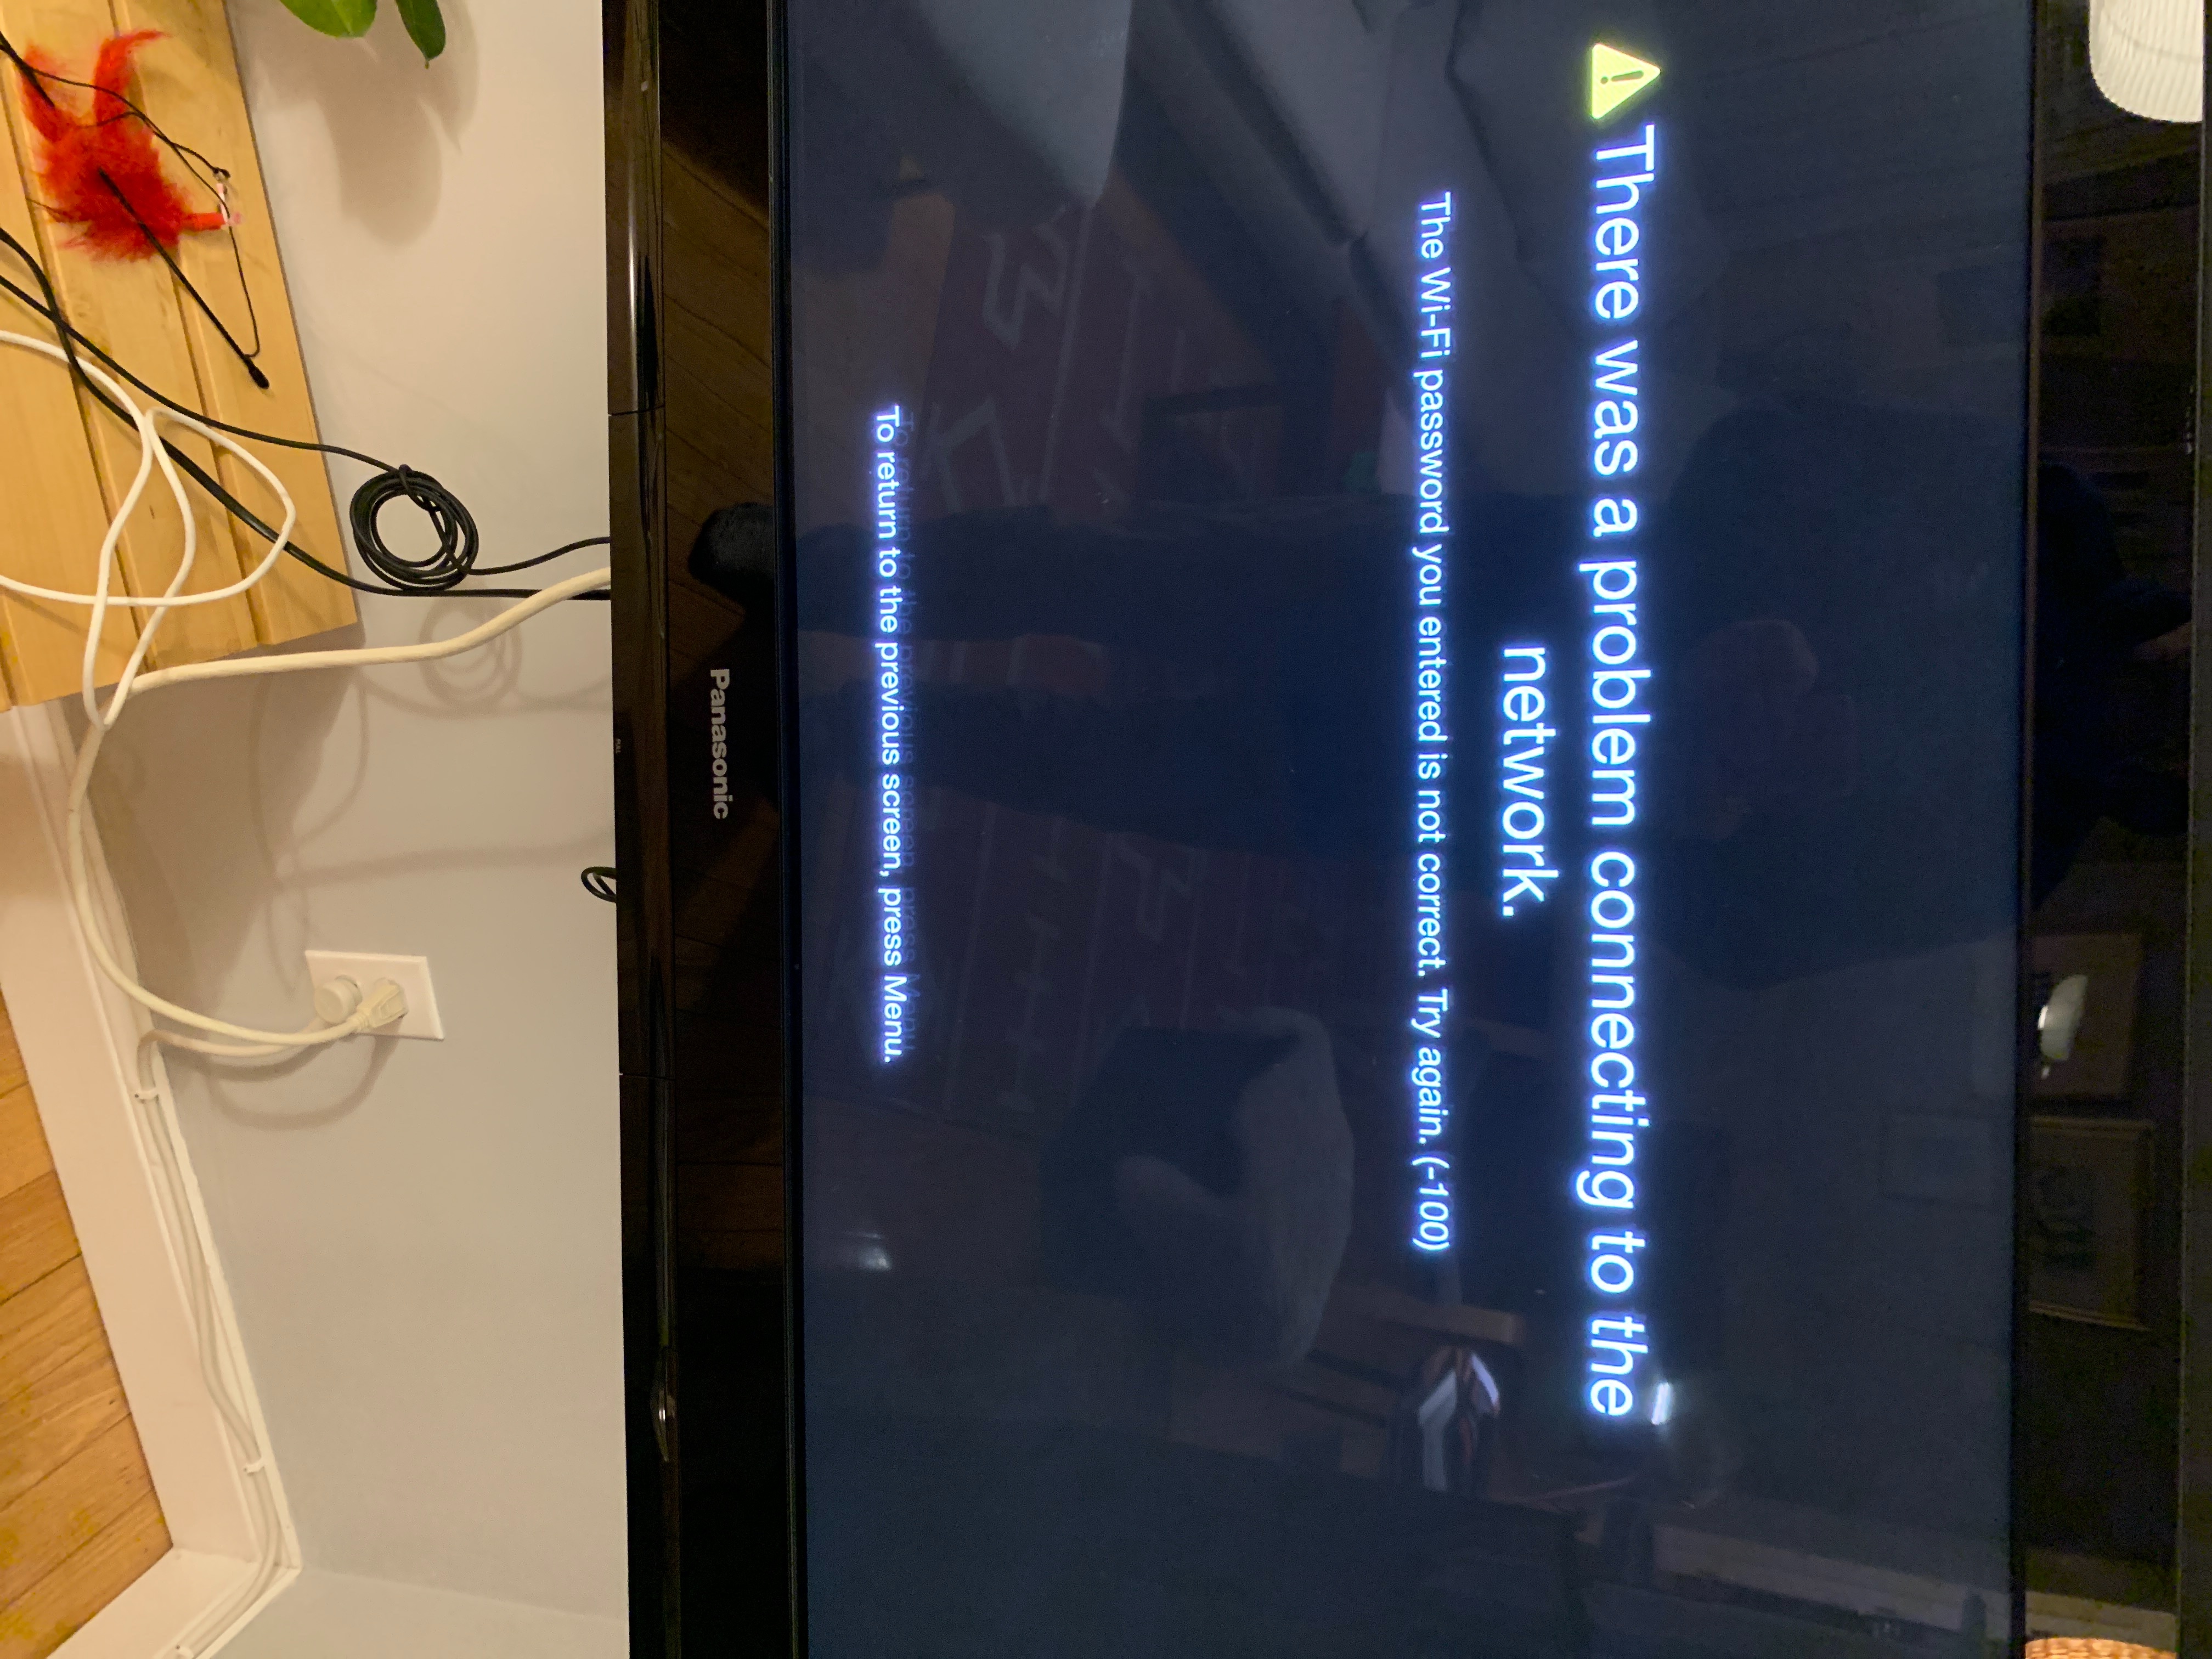 Apple TV does not allow WiFi pw input - Community